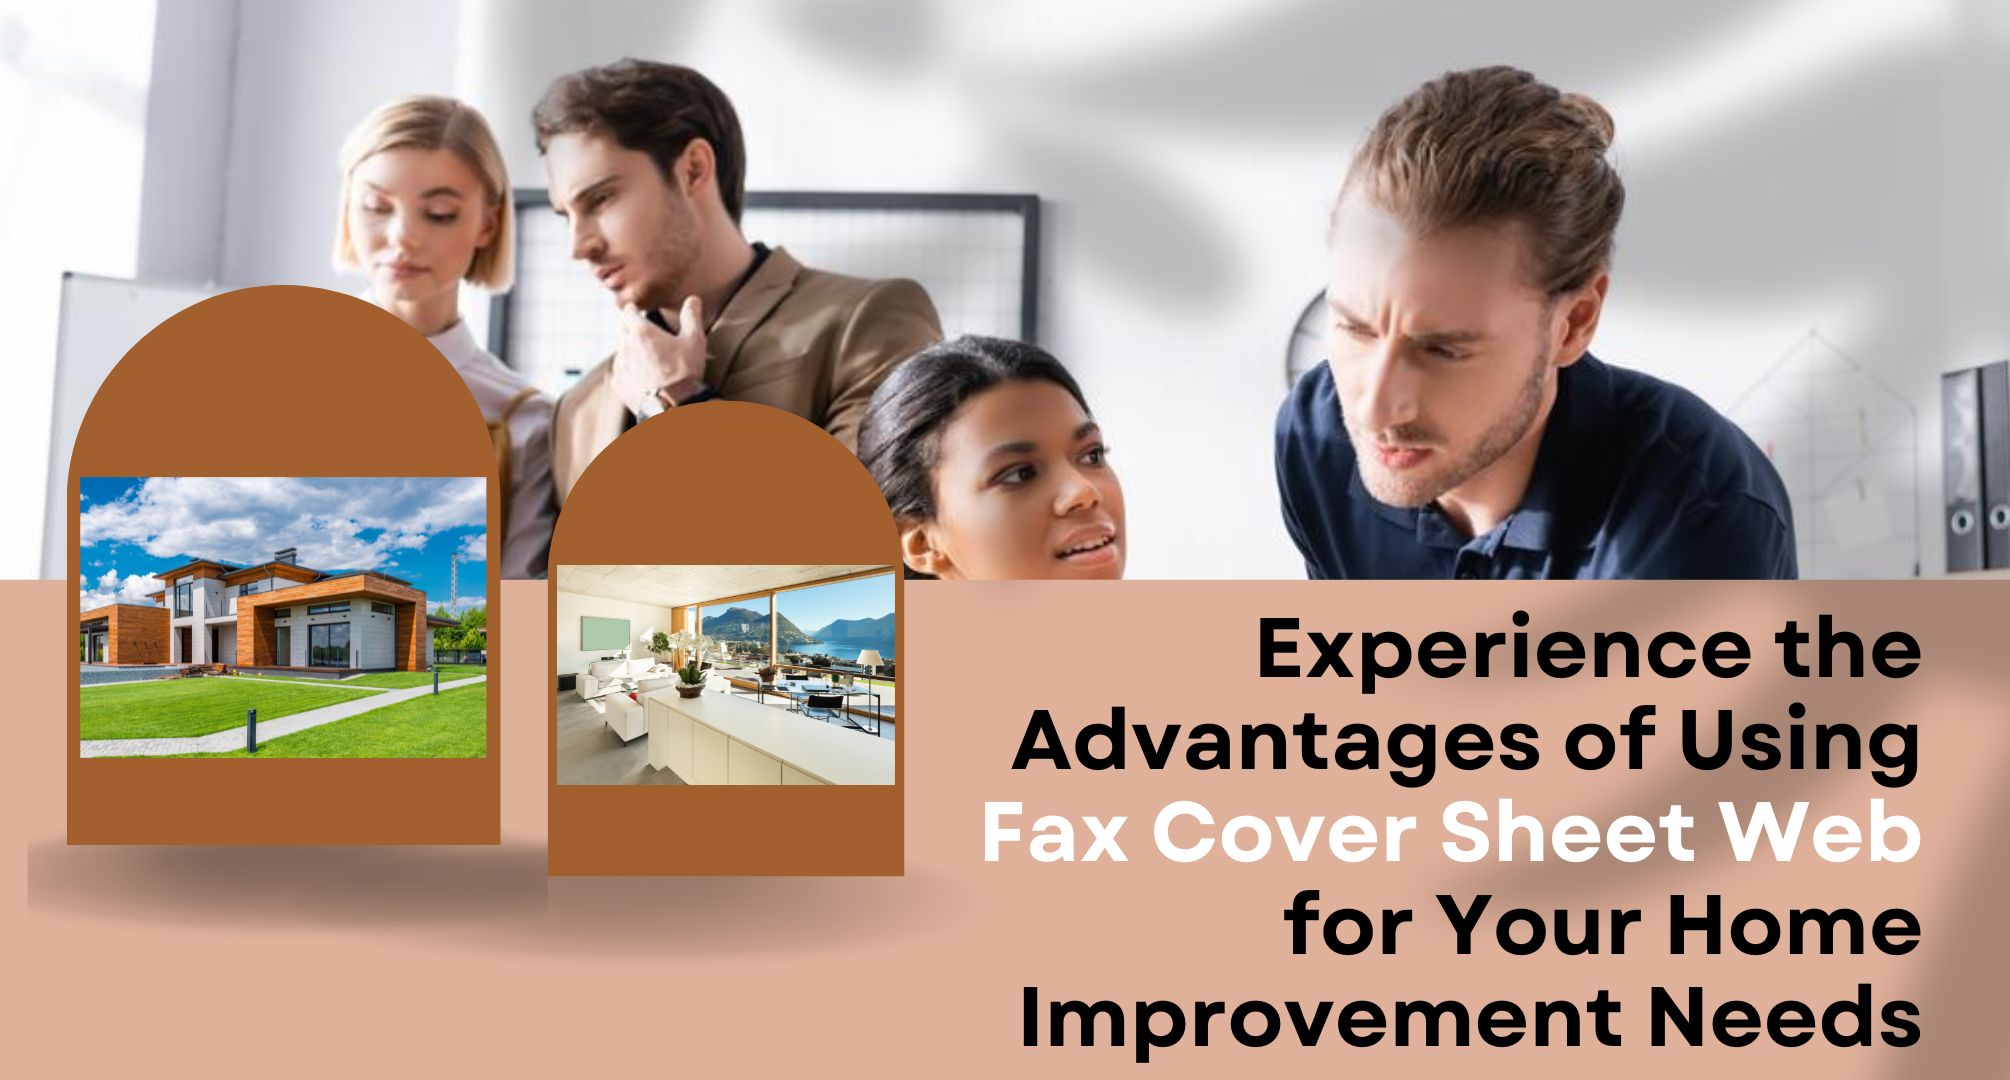 Experience the Advantages of Using Fax Cover Sheet Web for Your Home Improvement Needs